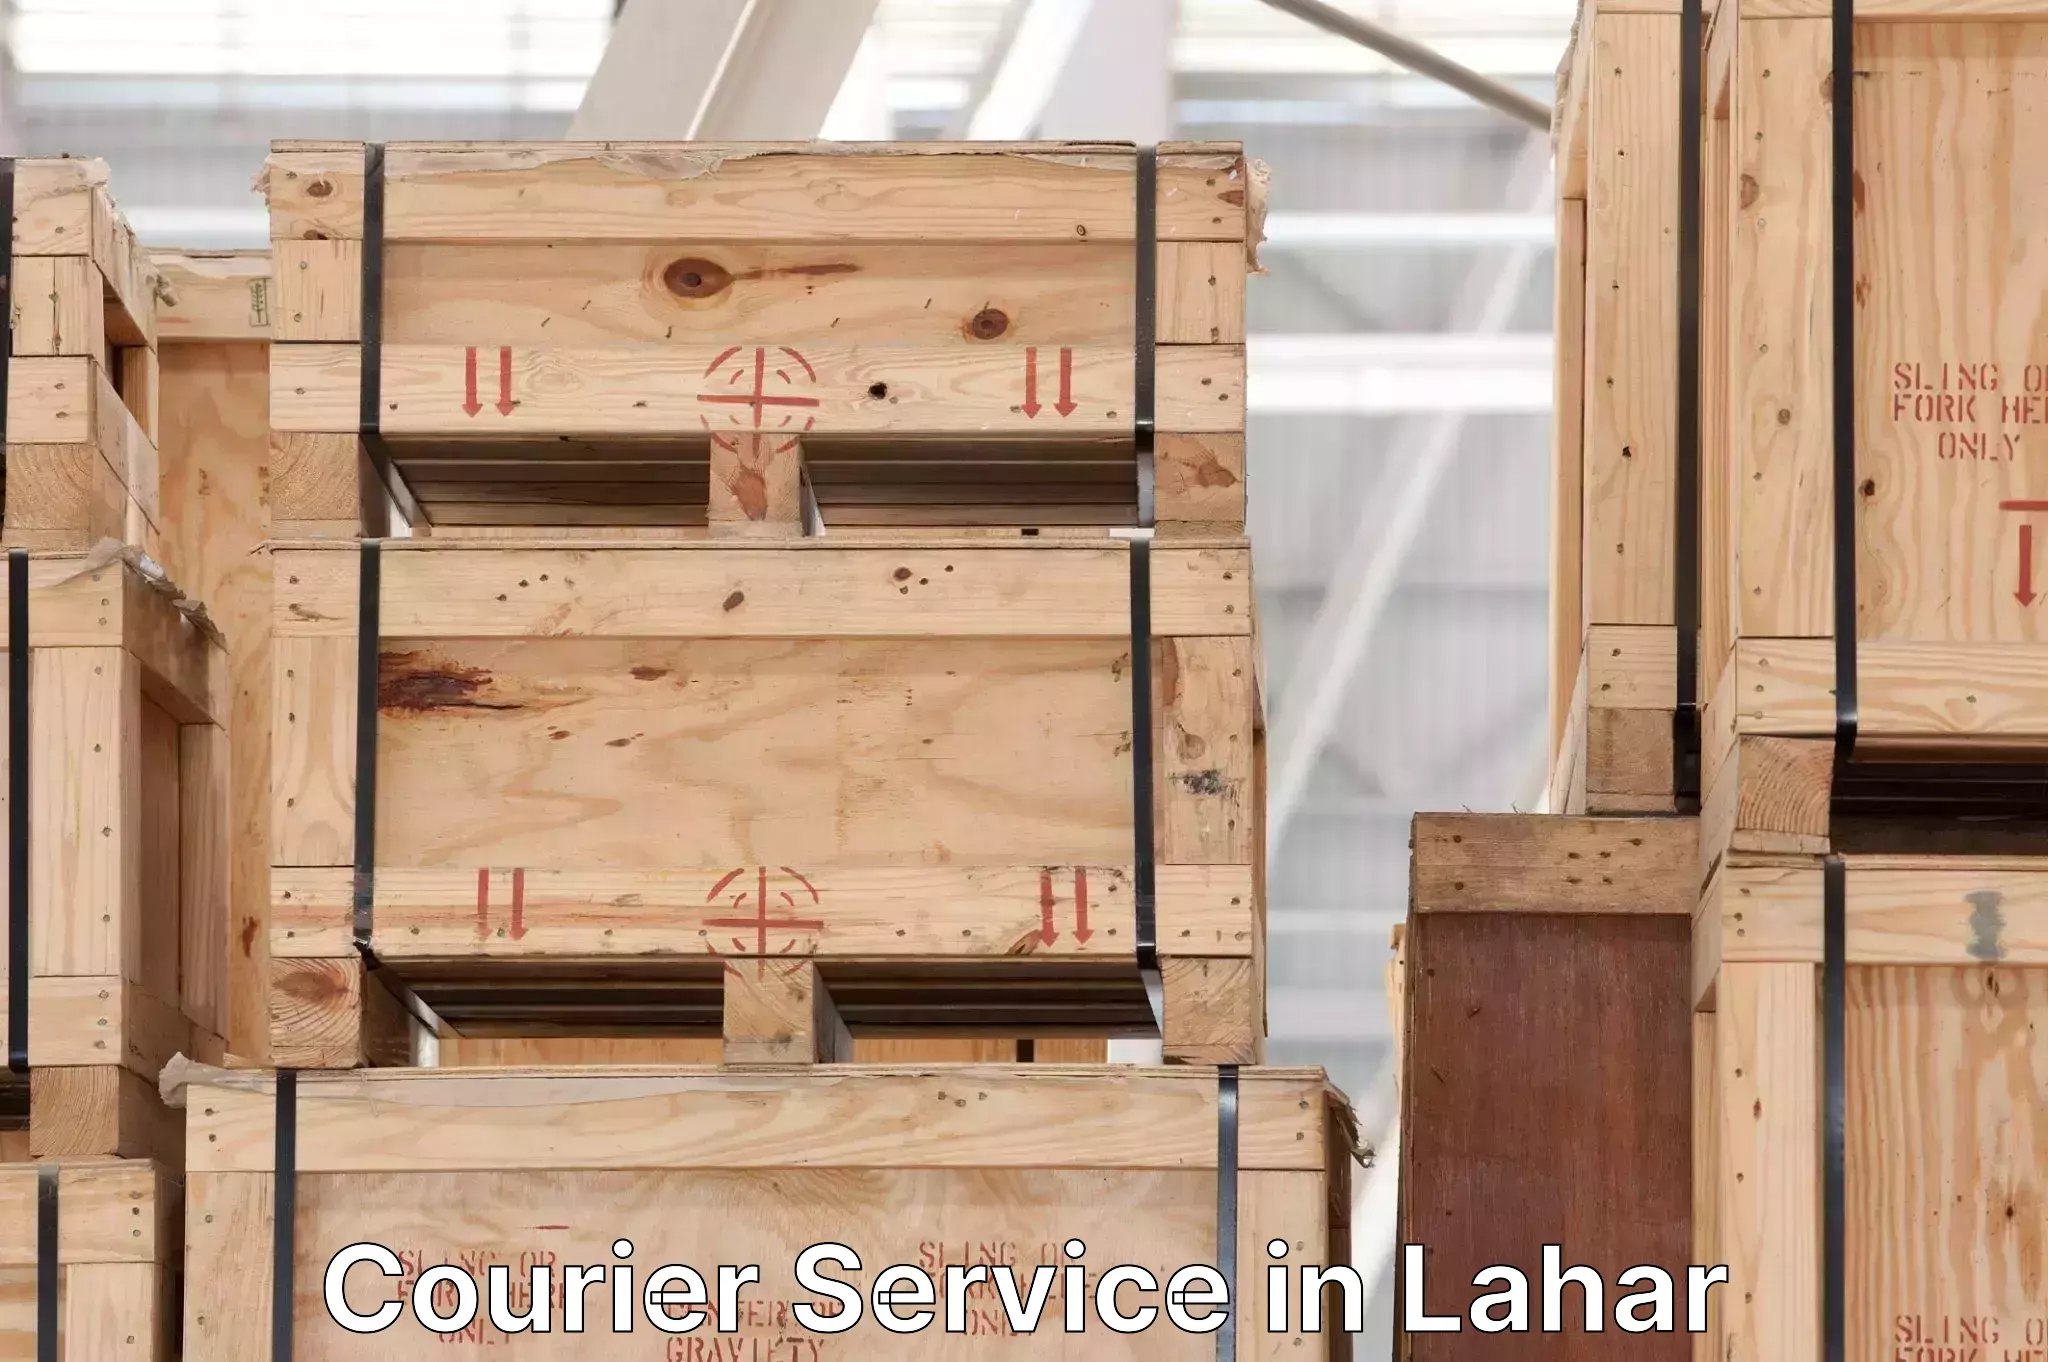 Courier service booking in Lahar